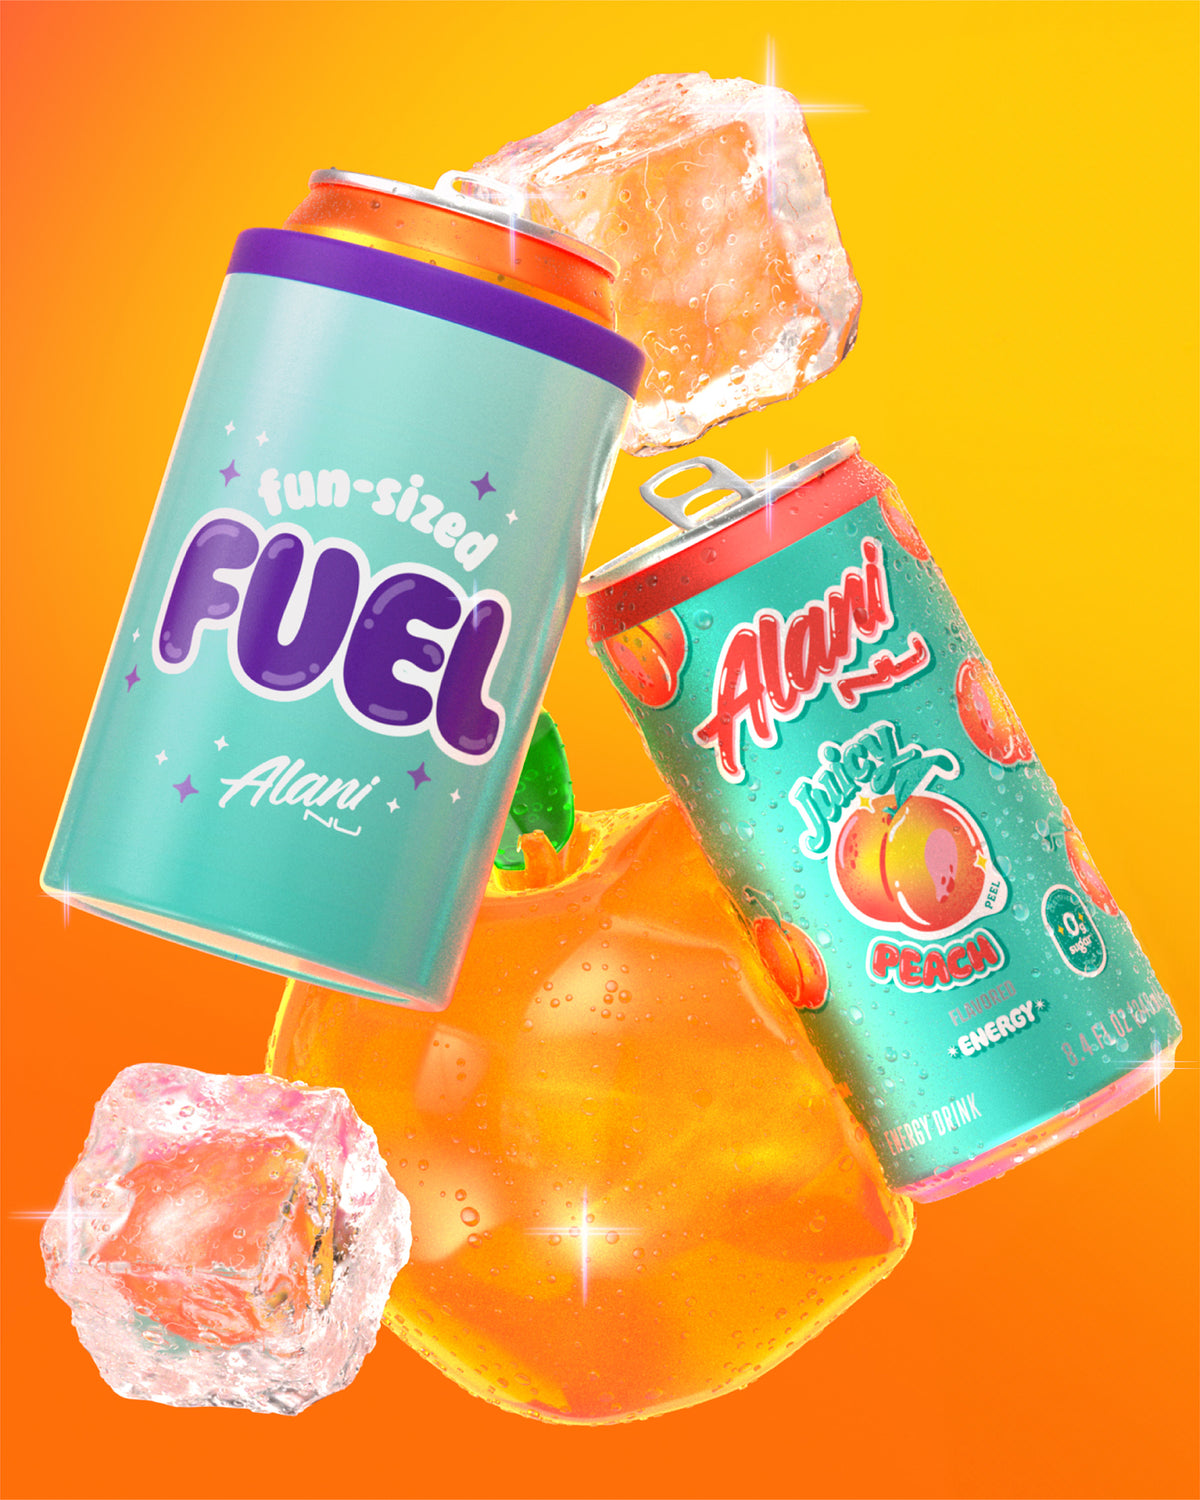 One mini can of Alani Energy drinks in flavor Juicy Peach that are shown mid-pour against each other, with one mini slim can labeled &quot;fun-sized FUEL&quot; in pastel colors.